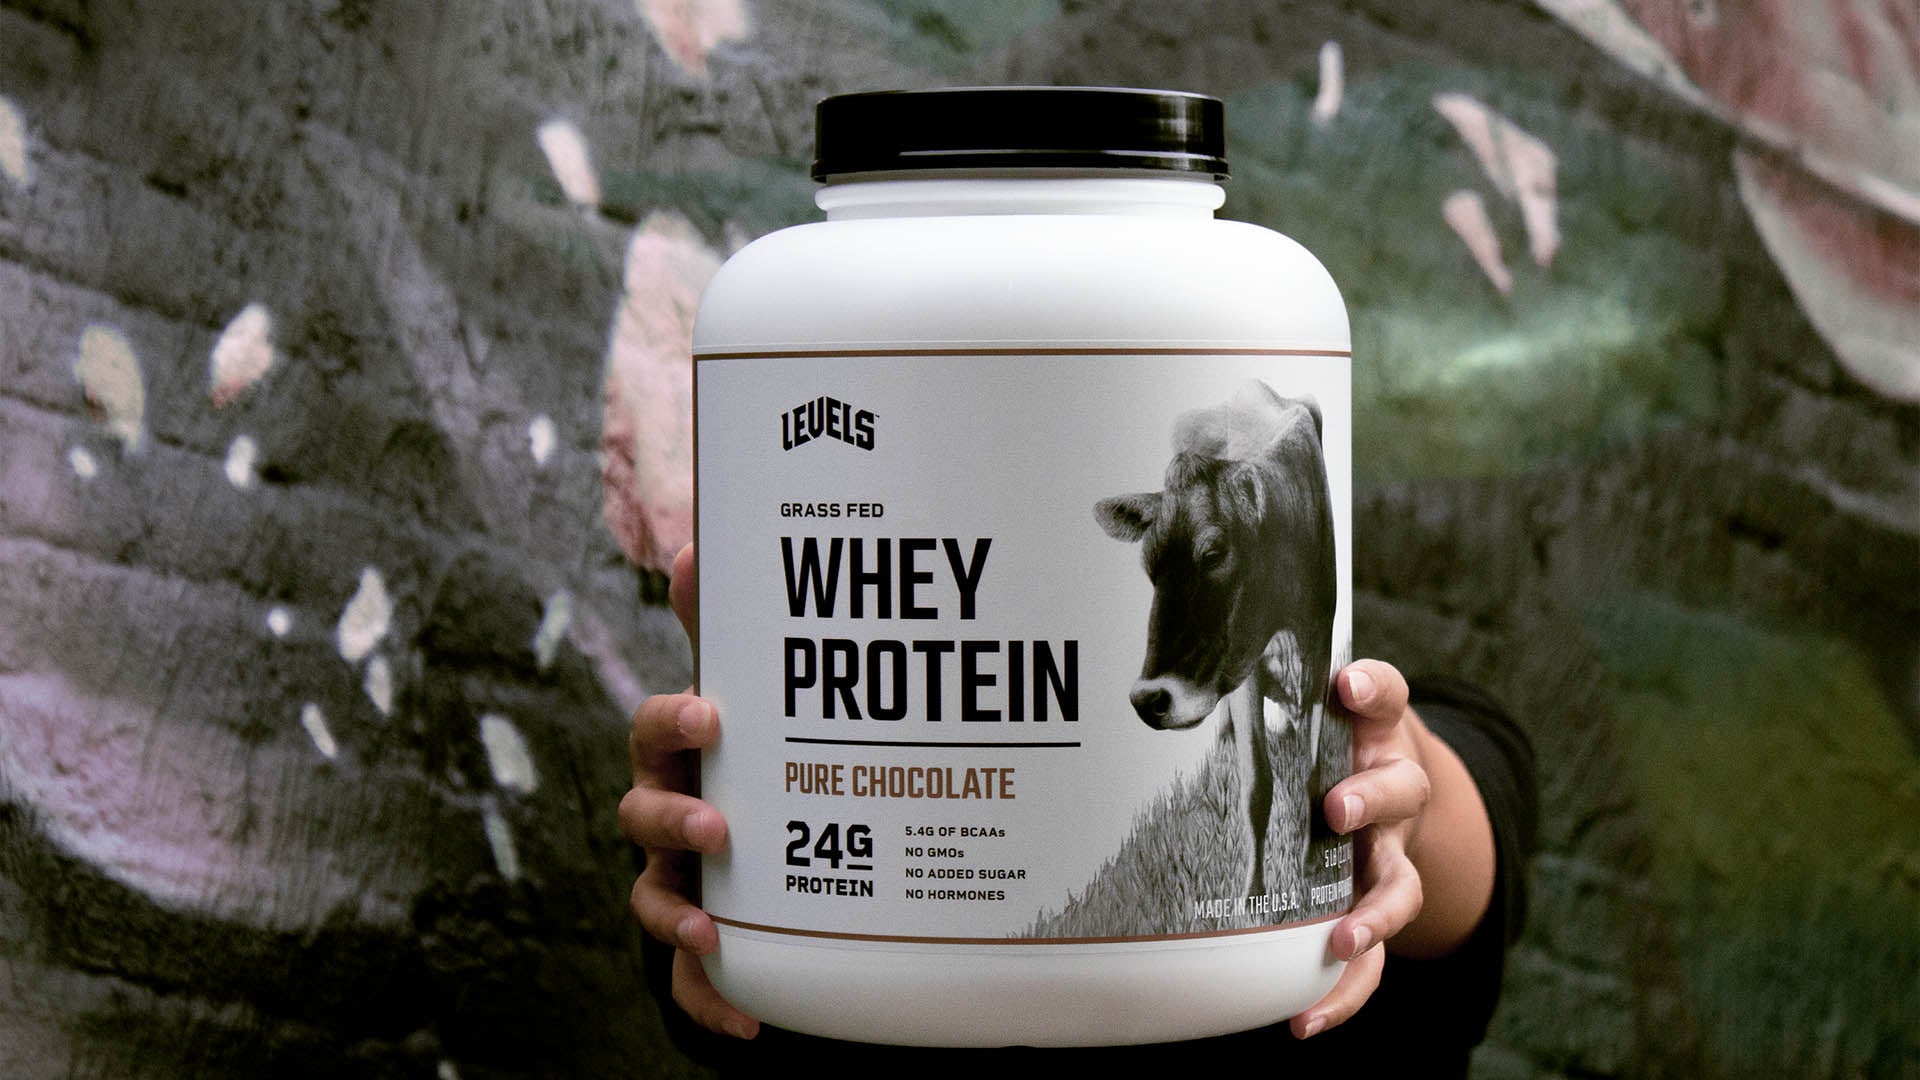 Levels Grass Fed Whey Protein